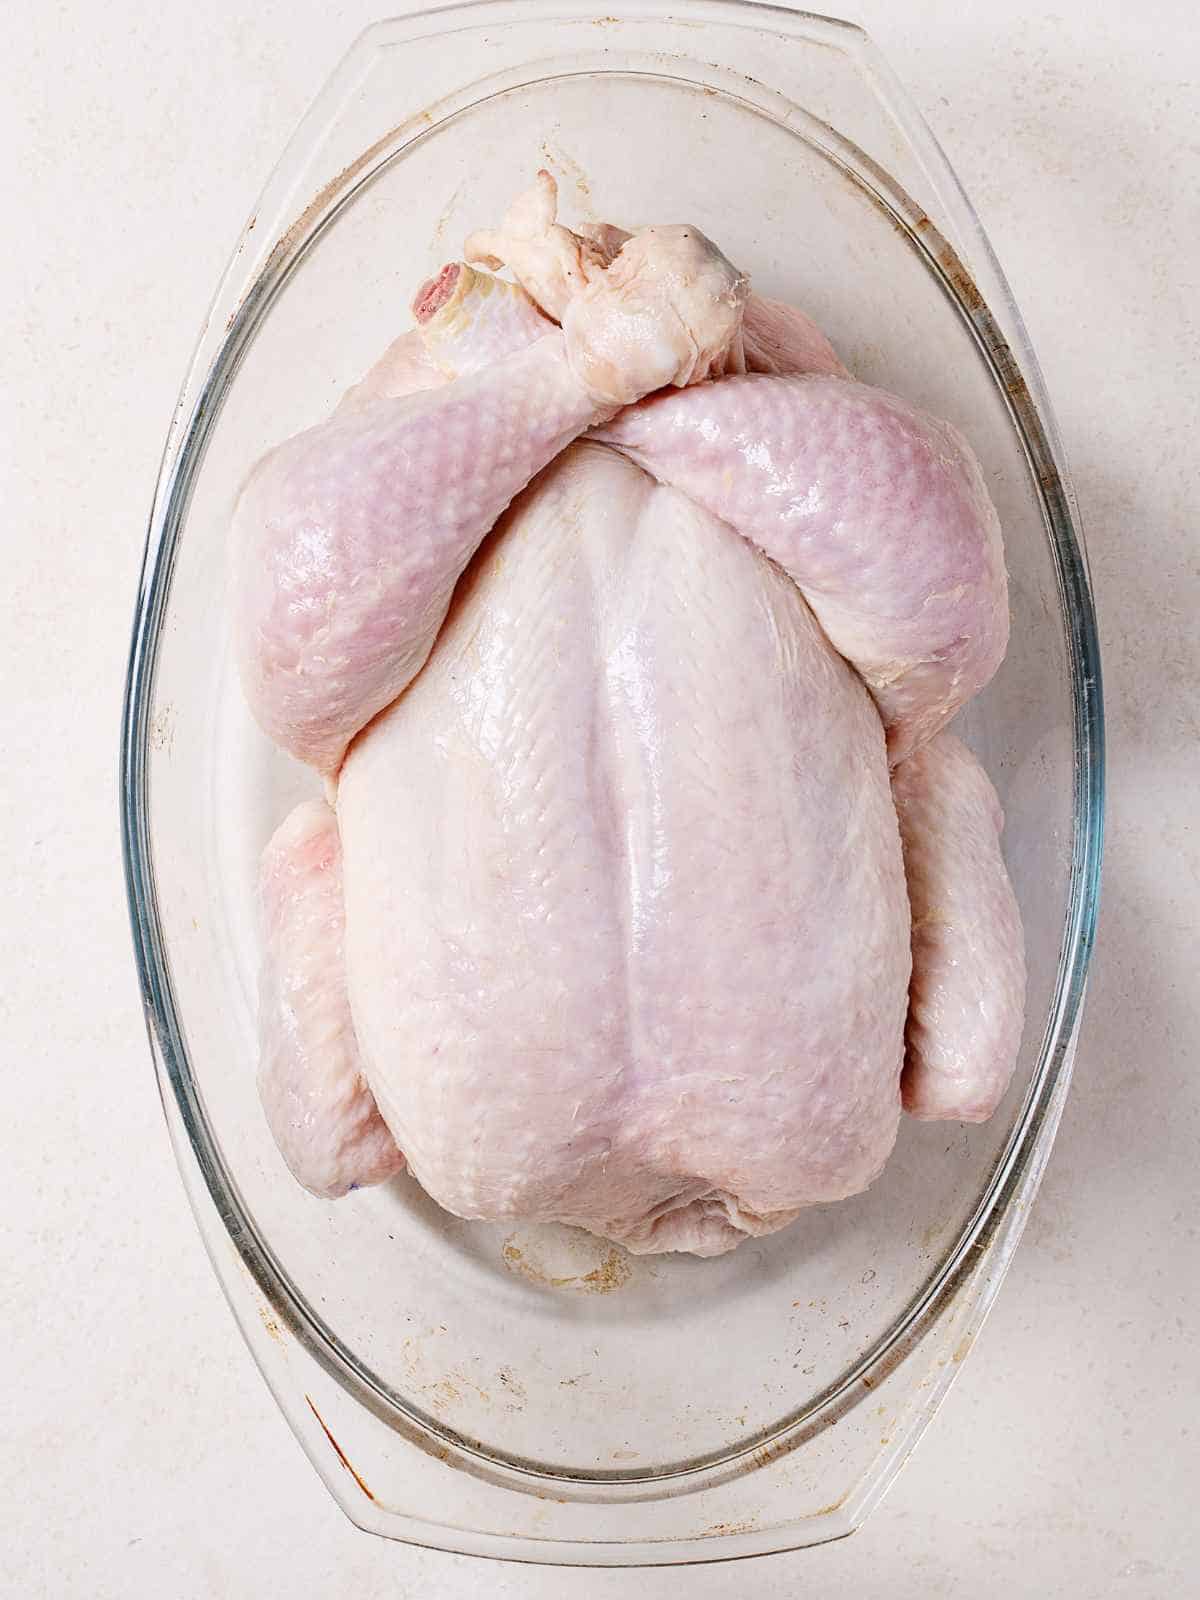 How to Thaw Chicken Safely